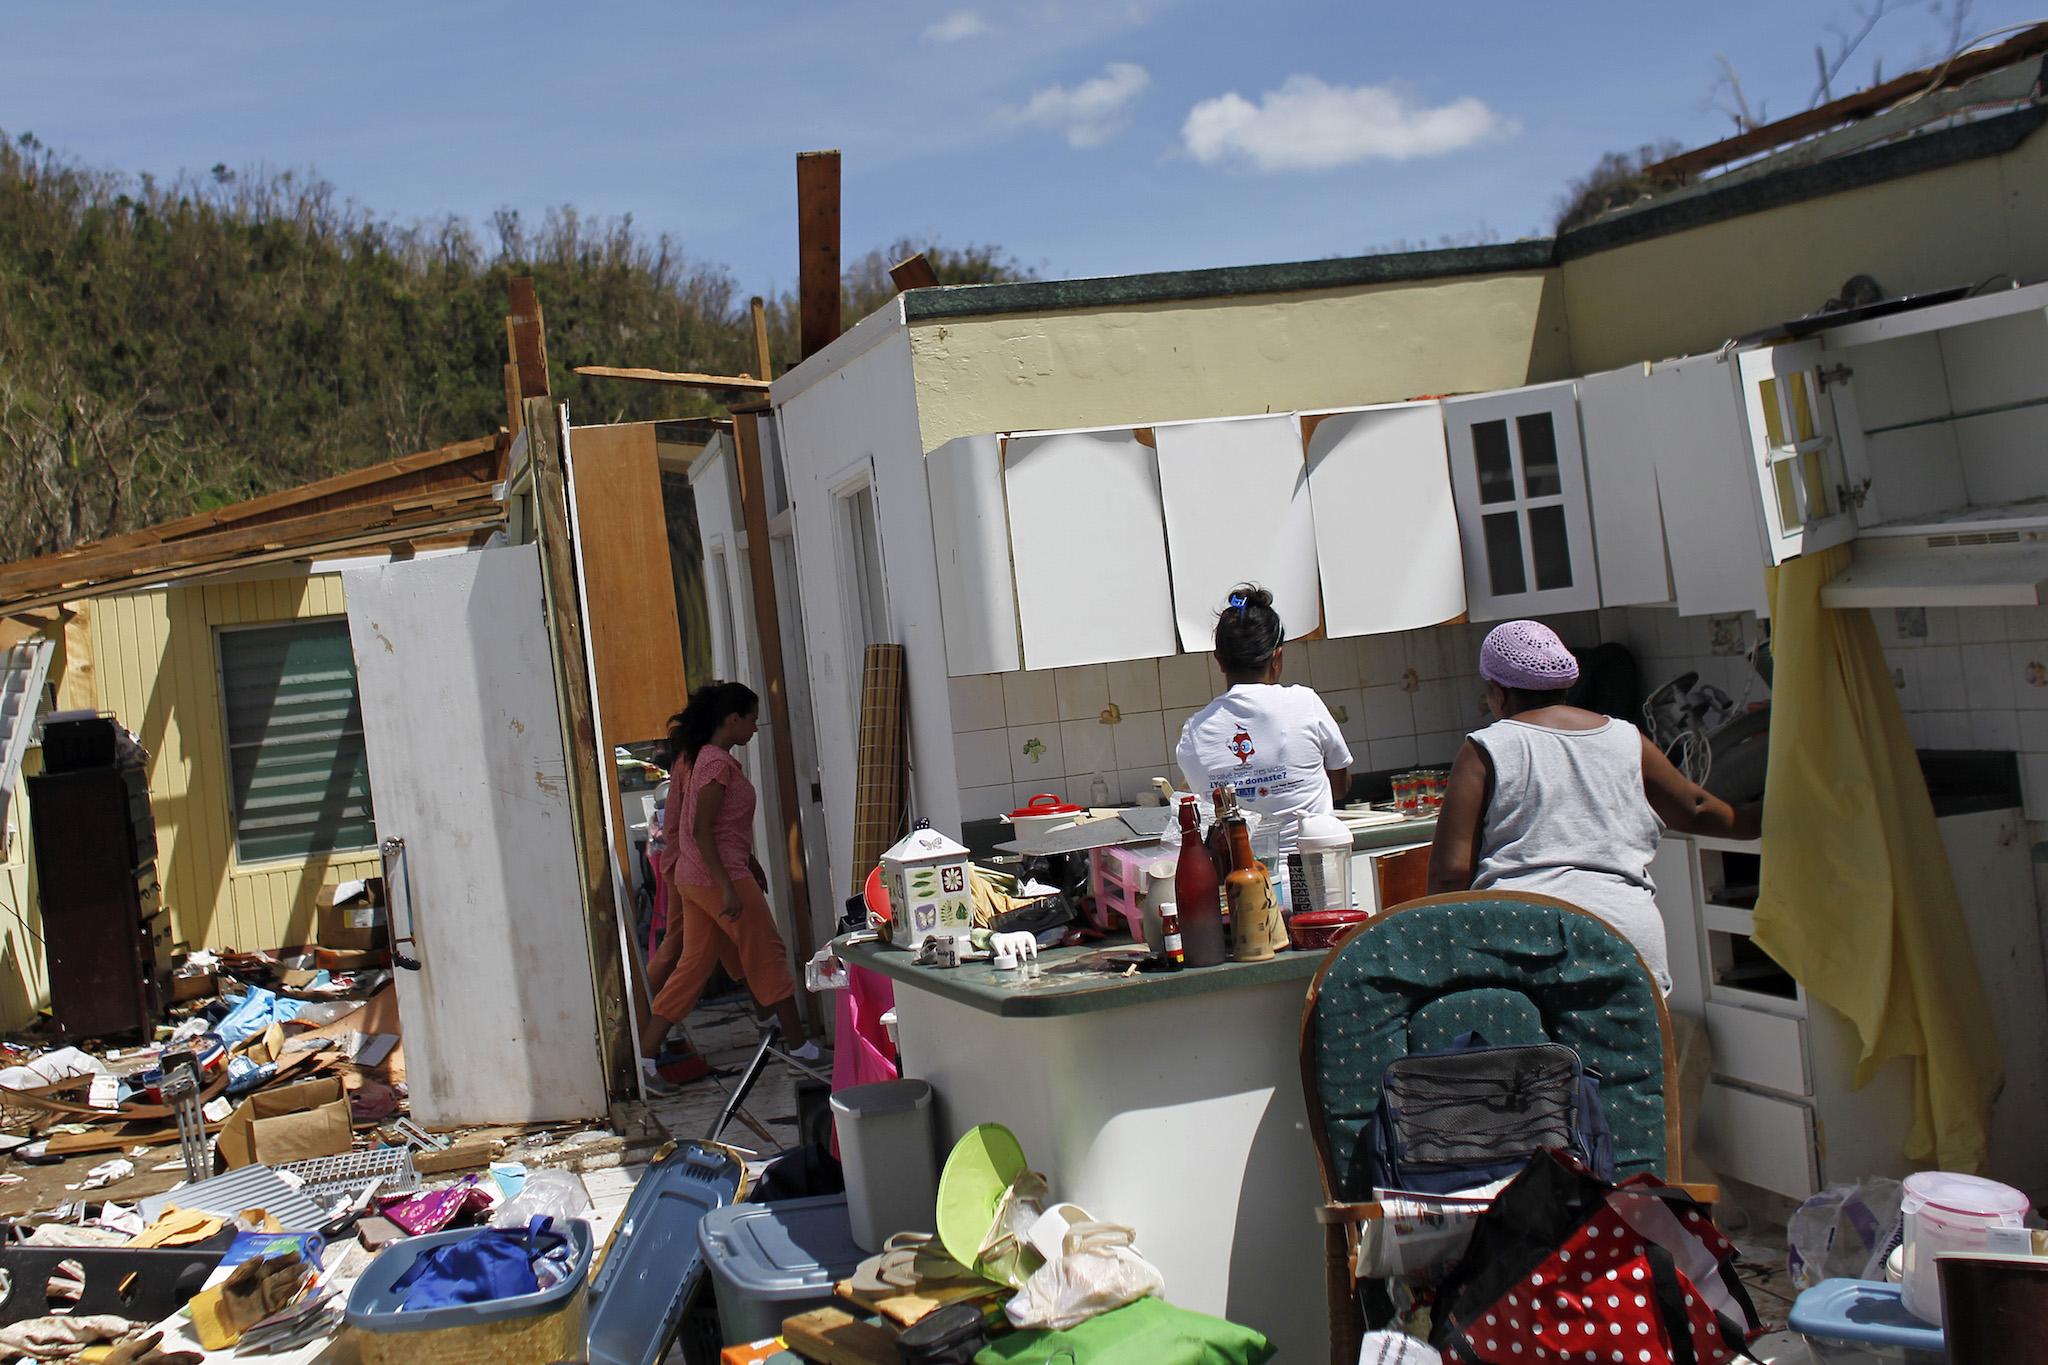 Family members collect belongings after hurricane-force winds destroyed their house in Toa Baja, west of San Juan, Puerto Rico